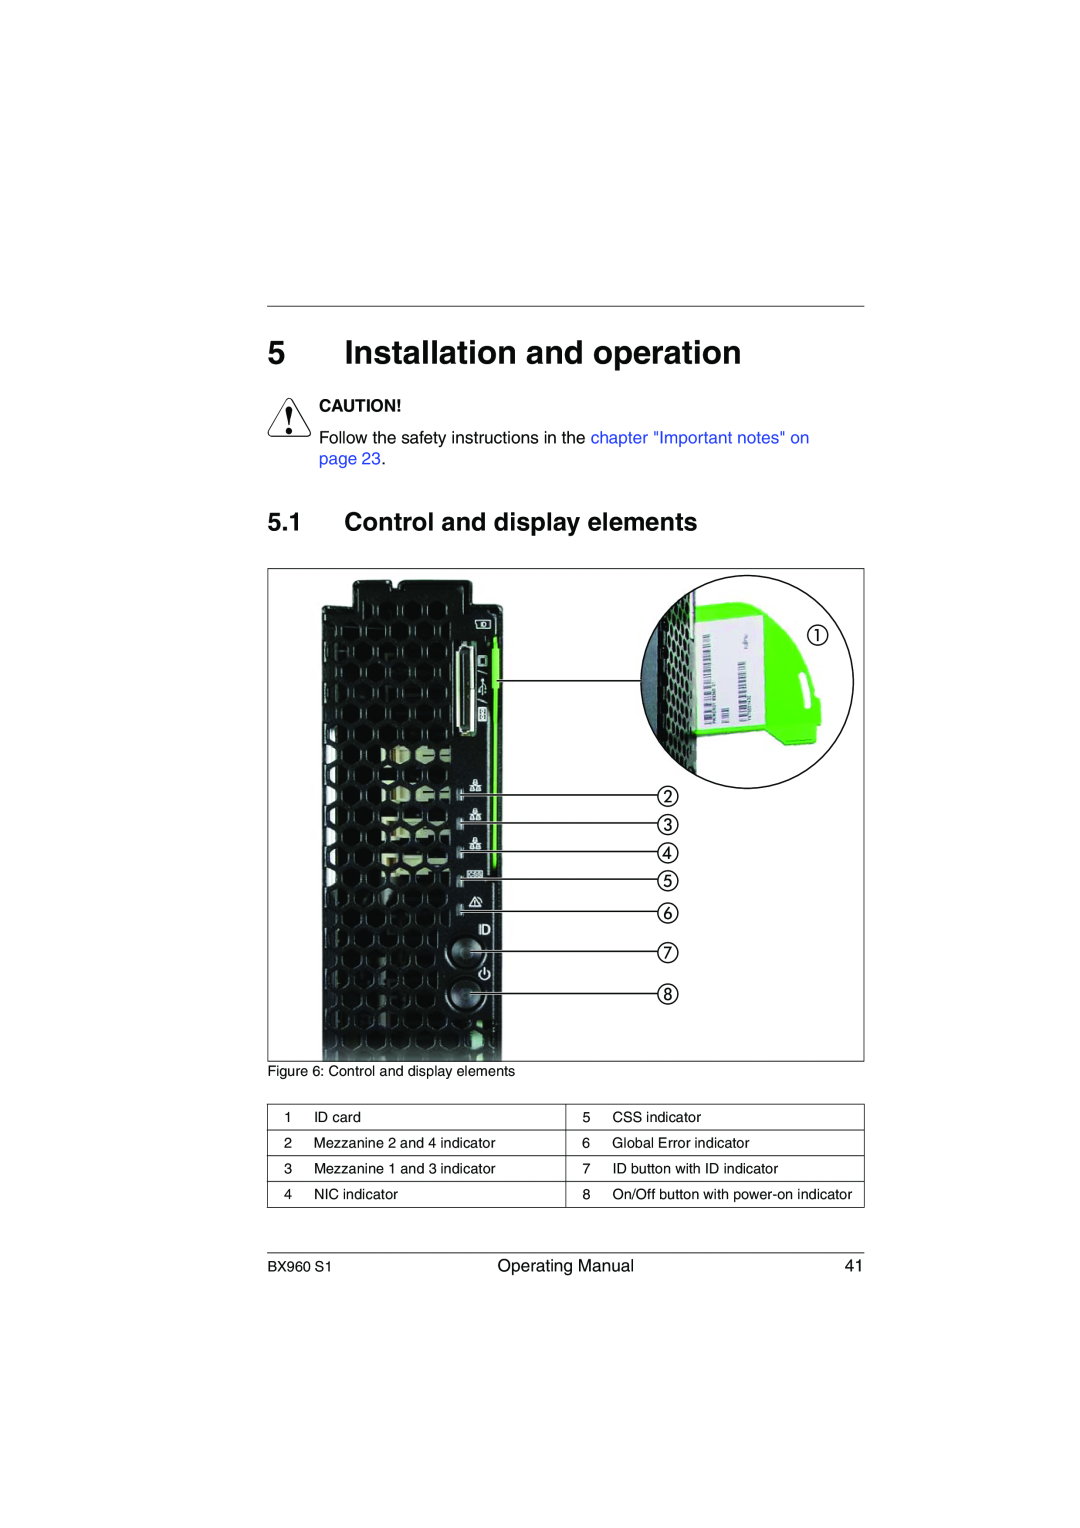 Fujitsu BX960 S1 manual Installation and operation, Control and display elements, V Caution 